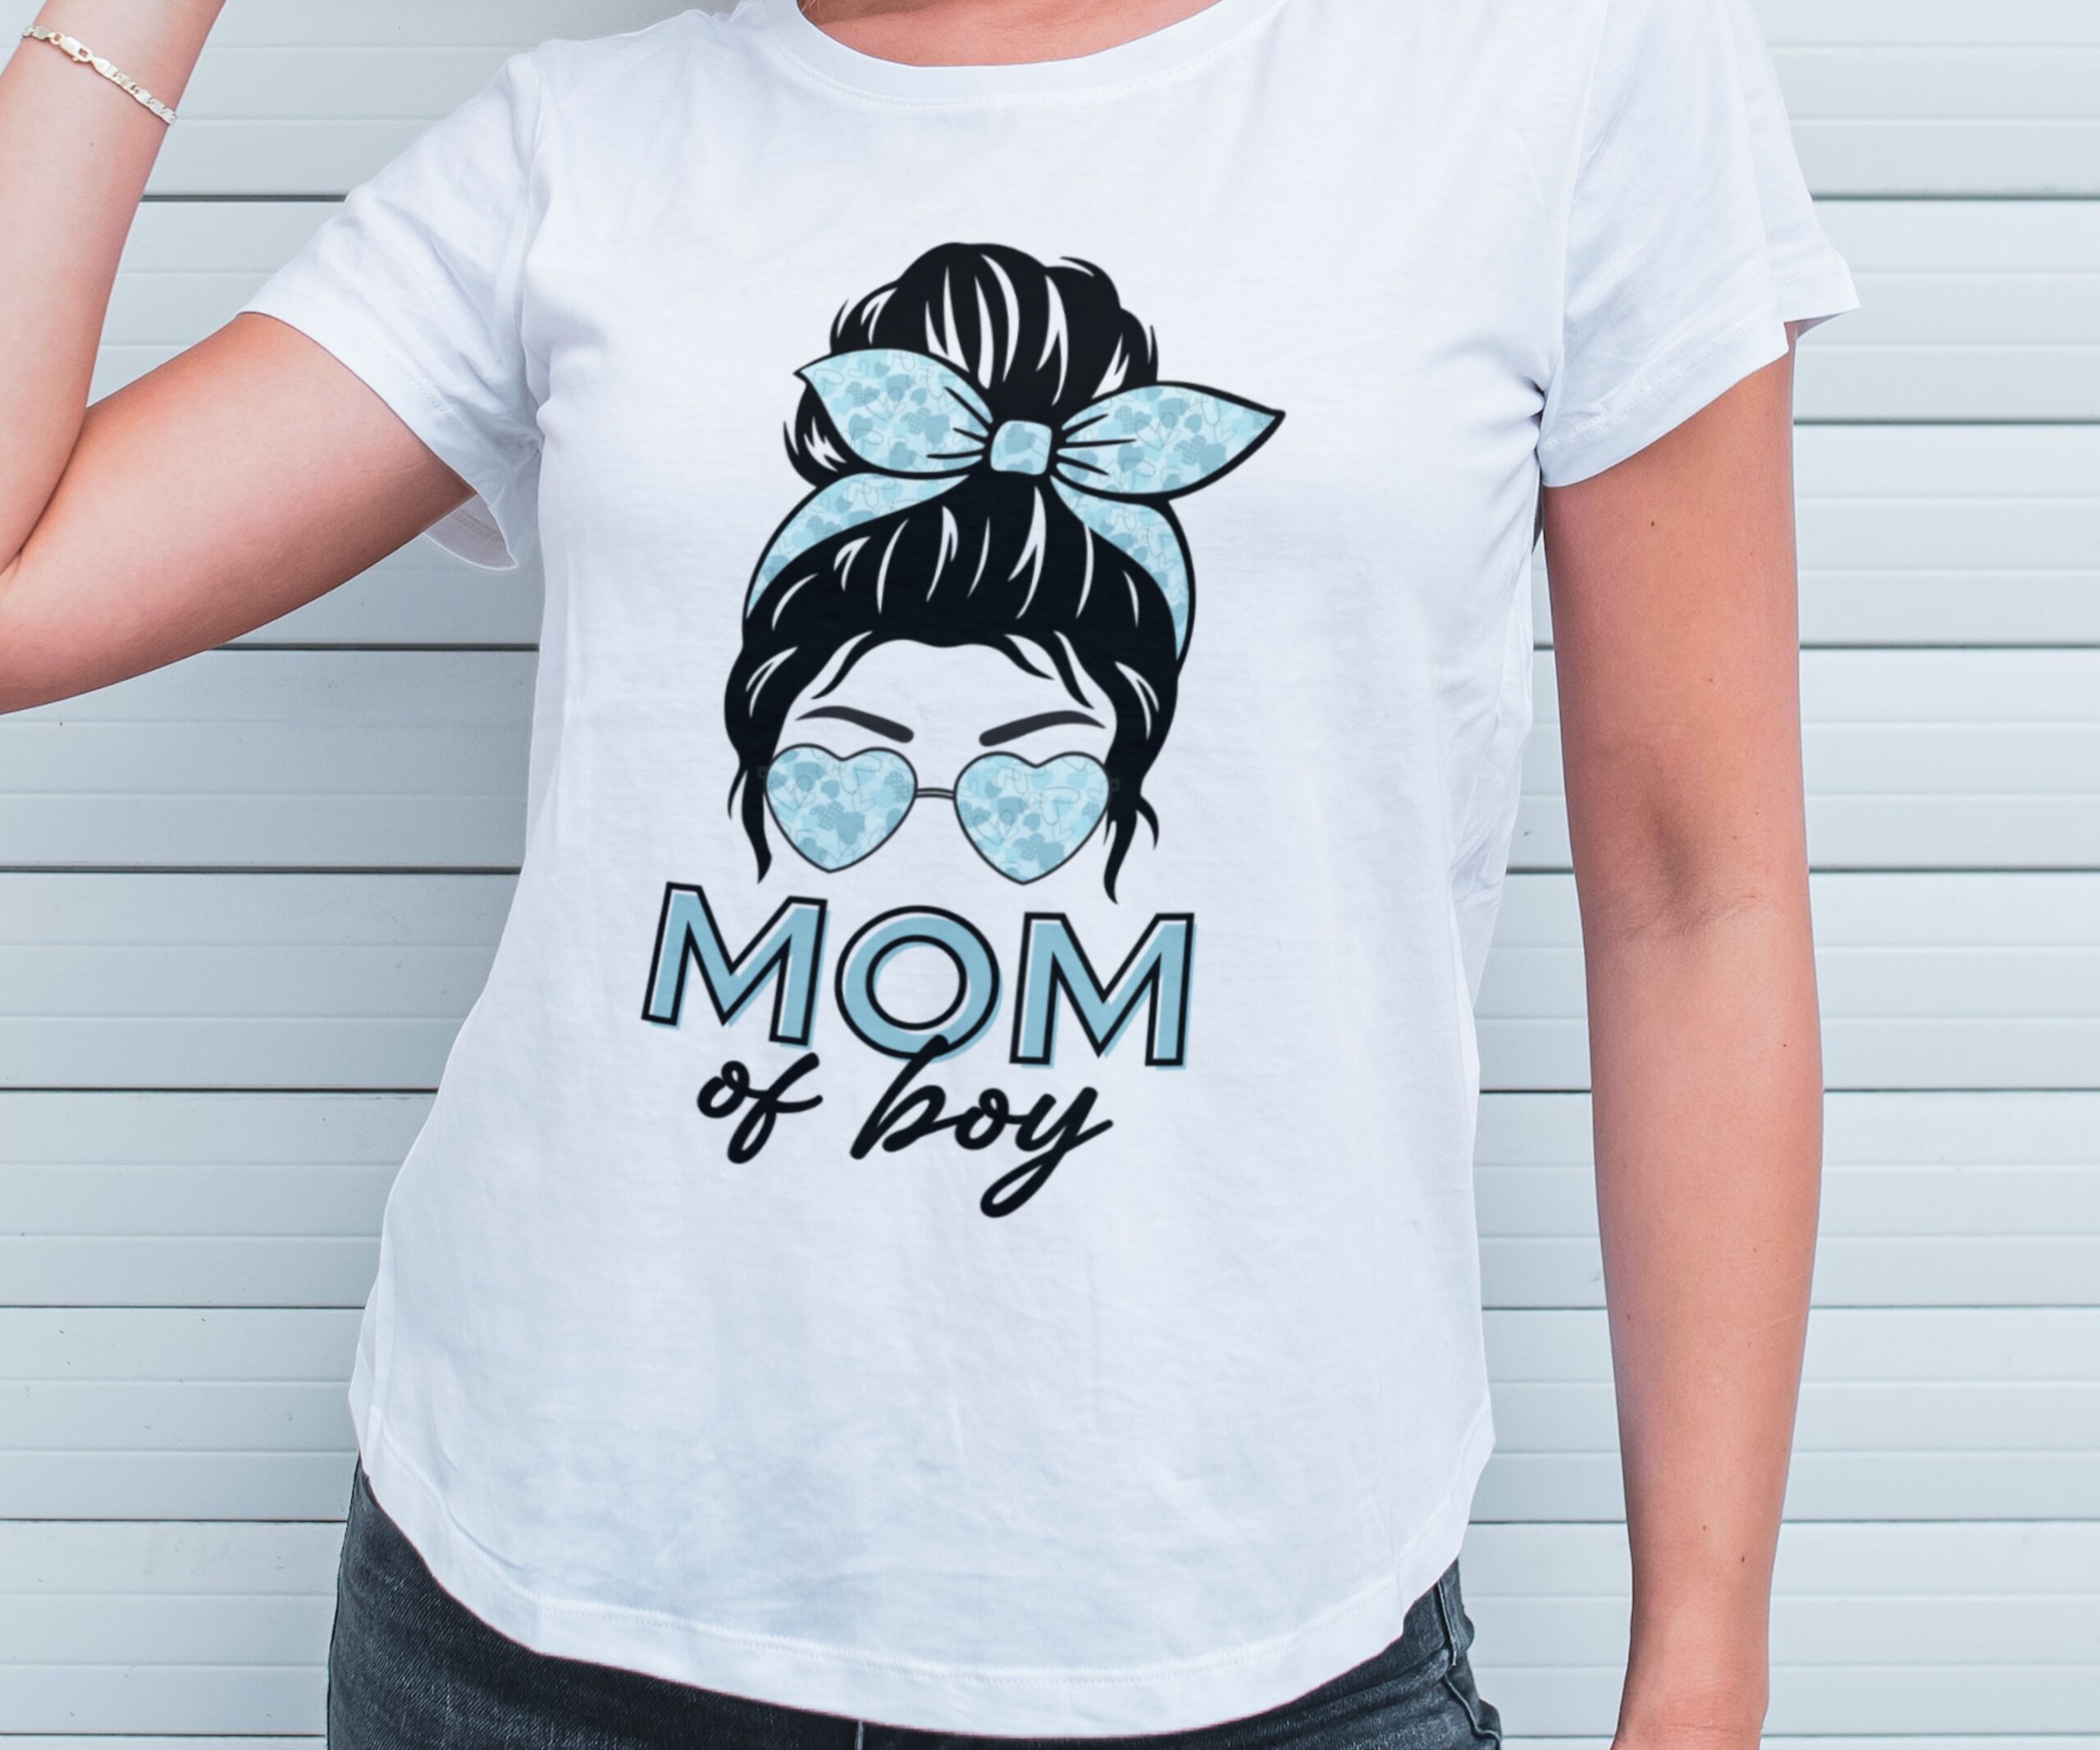 PNG for Sublimation, Mom of Boy.